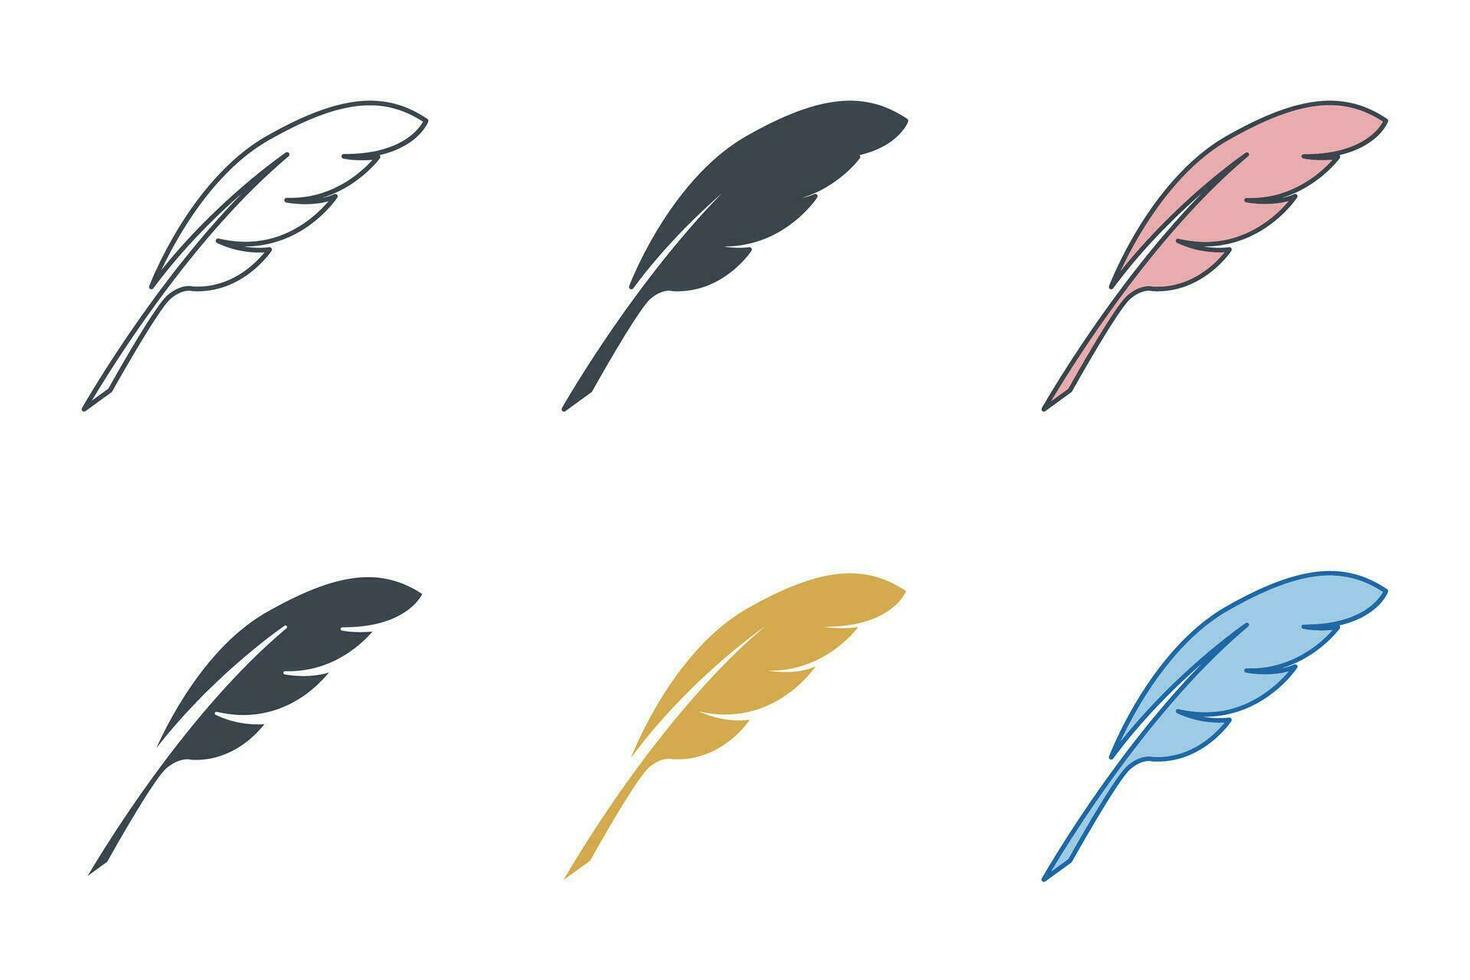 Quill Pen icon collection with different styles. vintage Feather quill pen icon symbol vector illustration isolated on white background